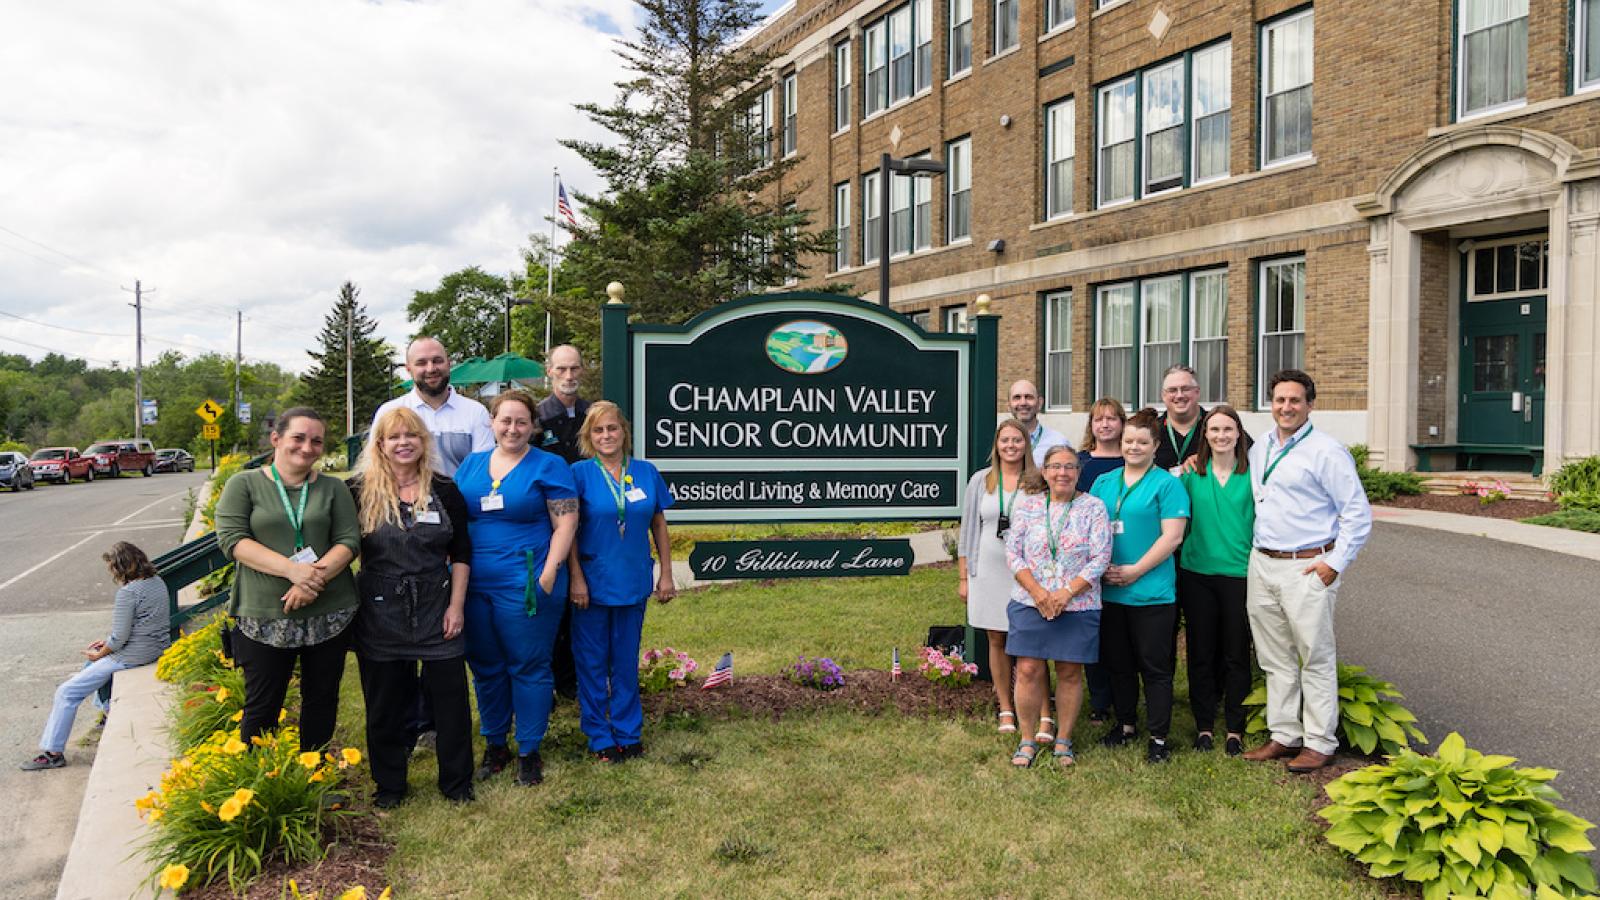 The CVSC family is pictured here beside the facility sign out front.